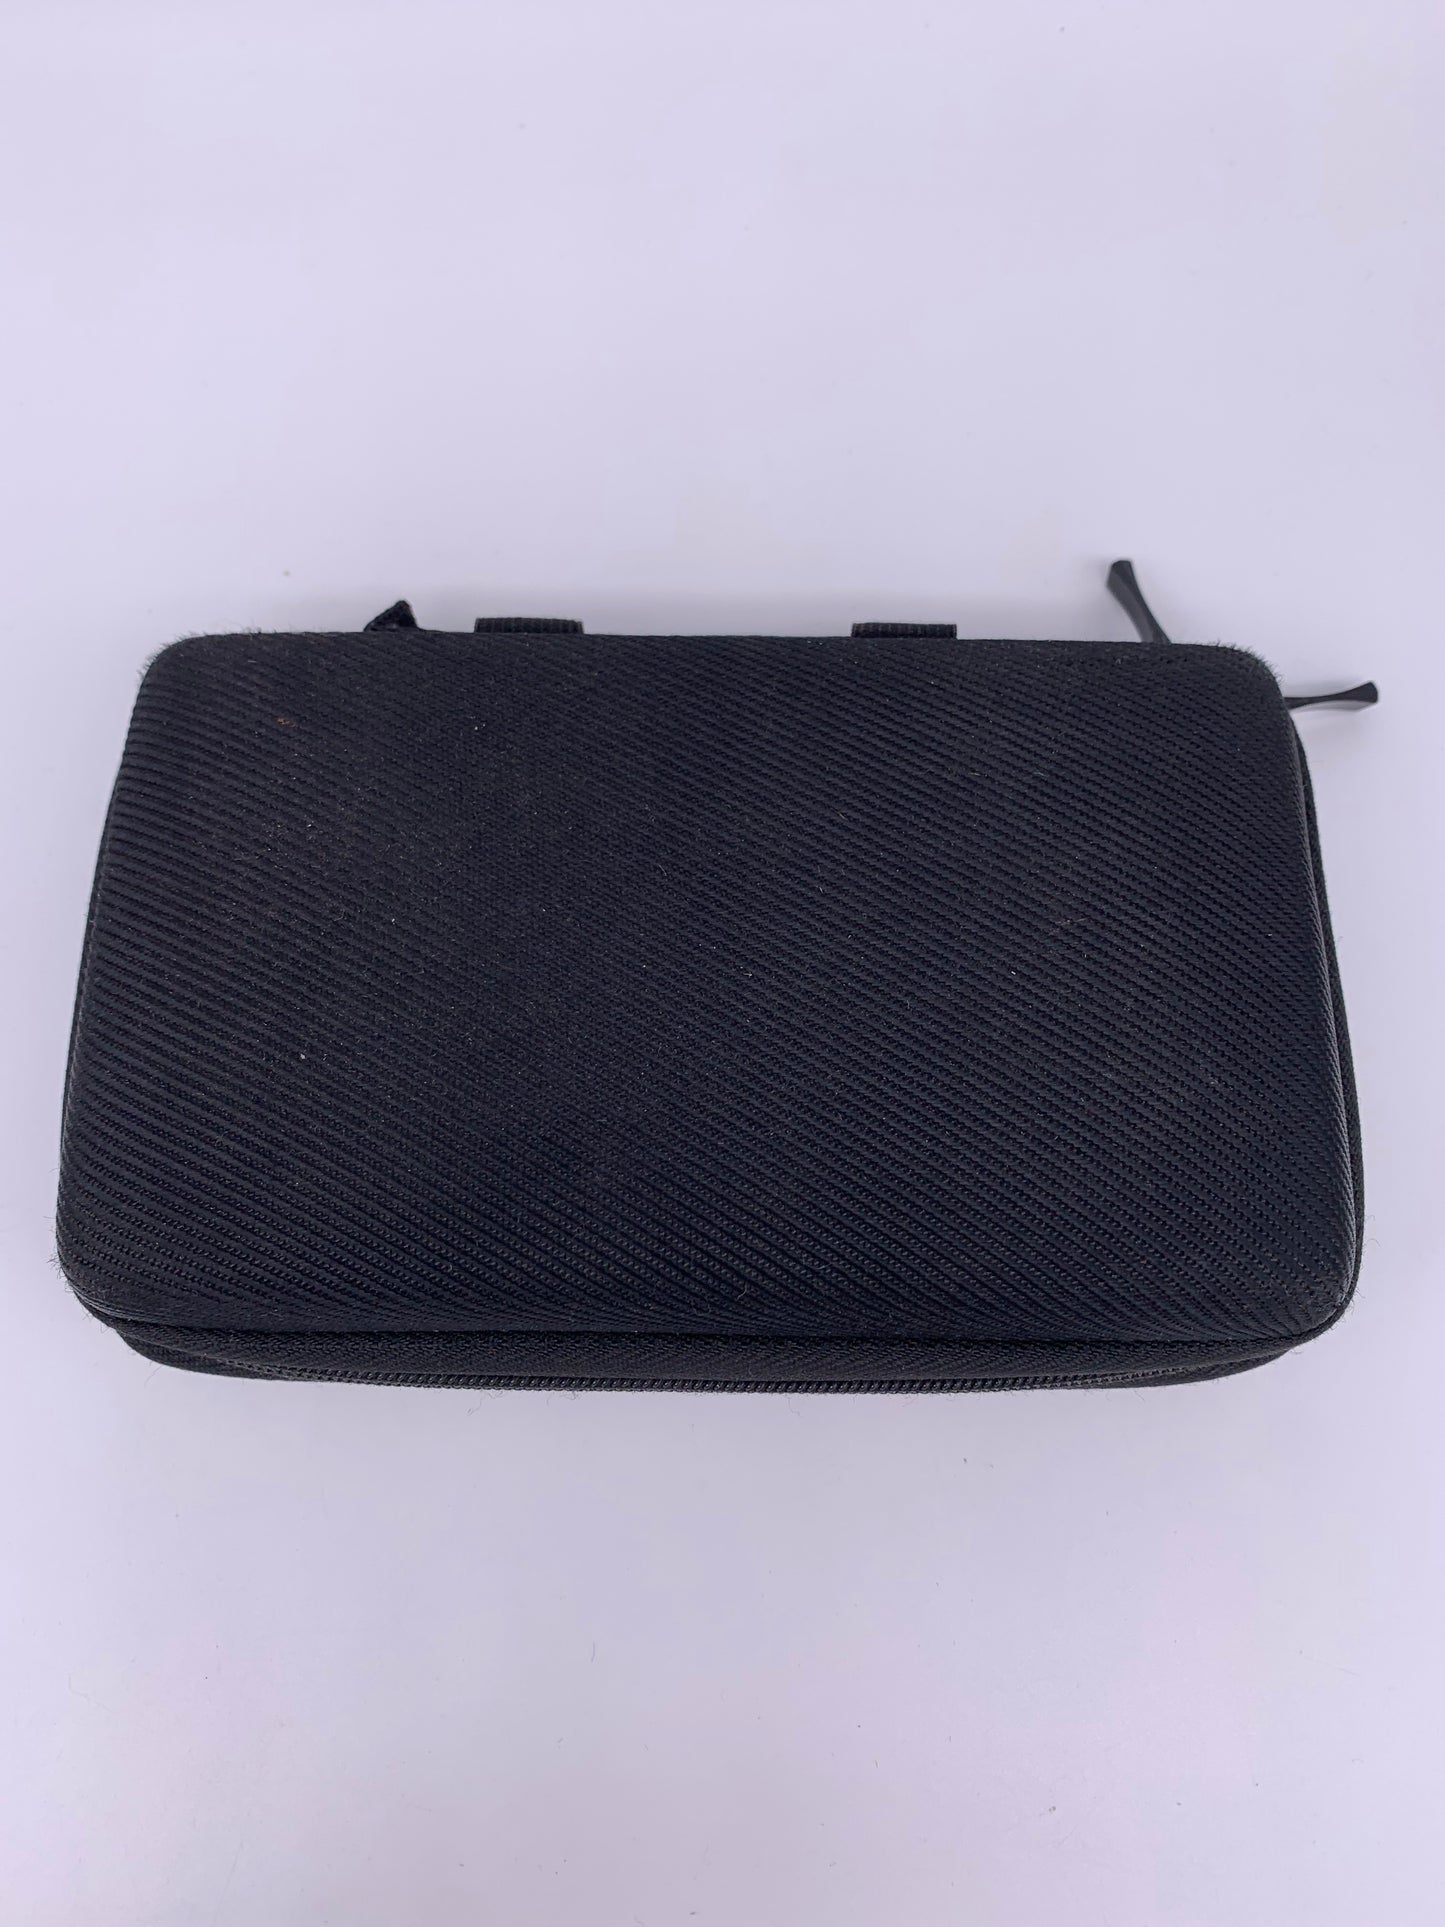 NiNTENDO DS XL | CARRYiNG CASE